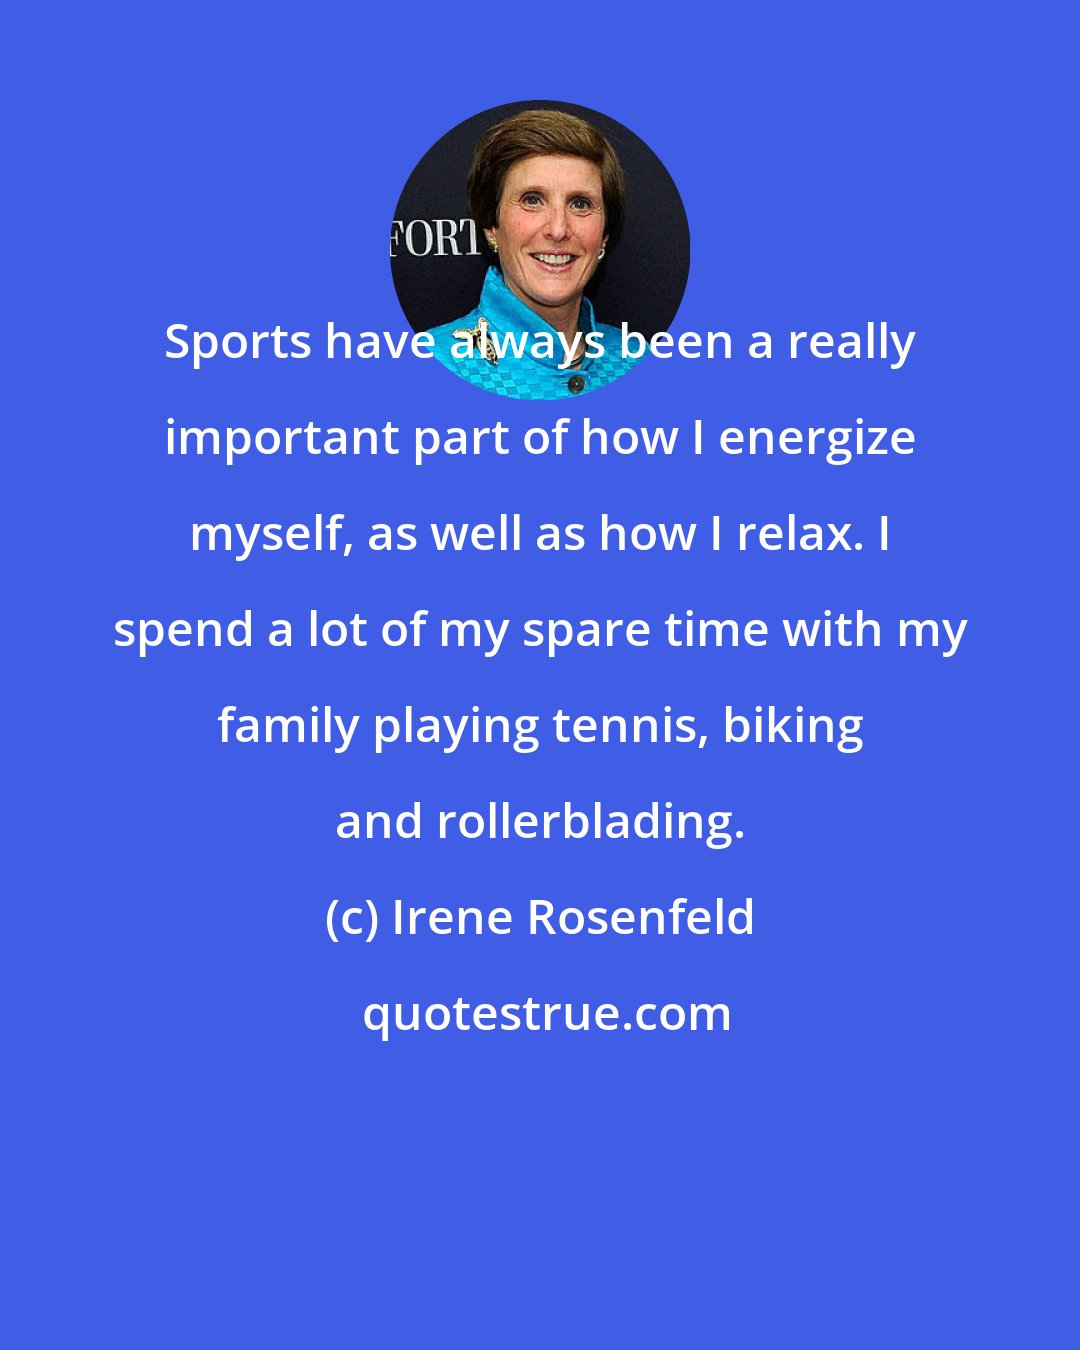 Irene Rosenfeld: Sports have always been a really important part of how I energize myself, as well as how I relax. I spend a lot of my spare time with my family playing tennis, biking and rollerblading.